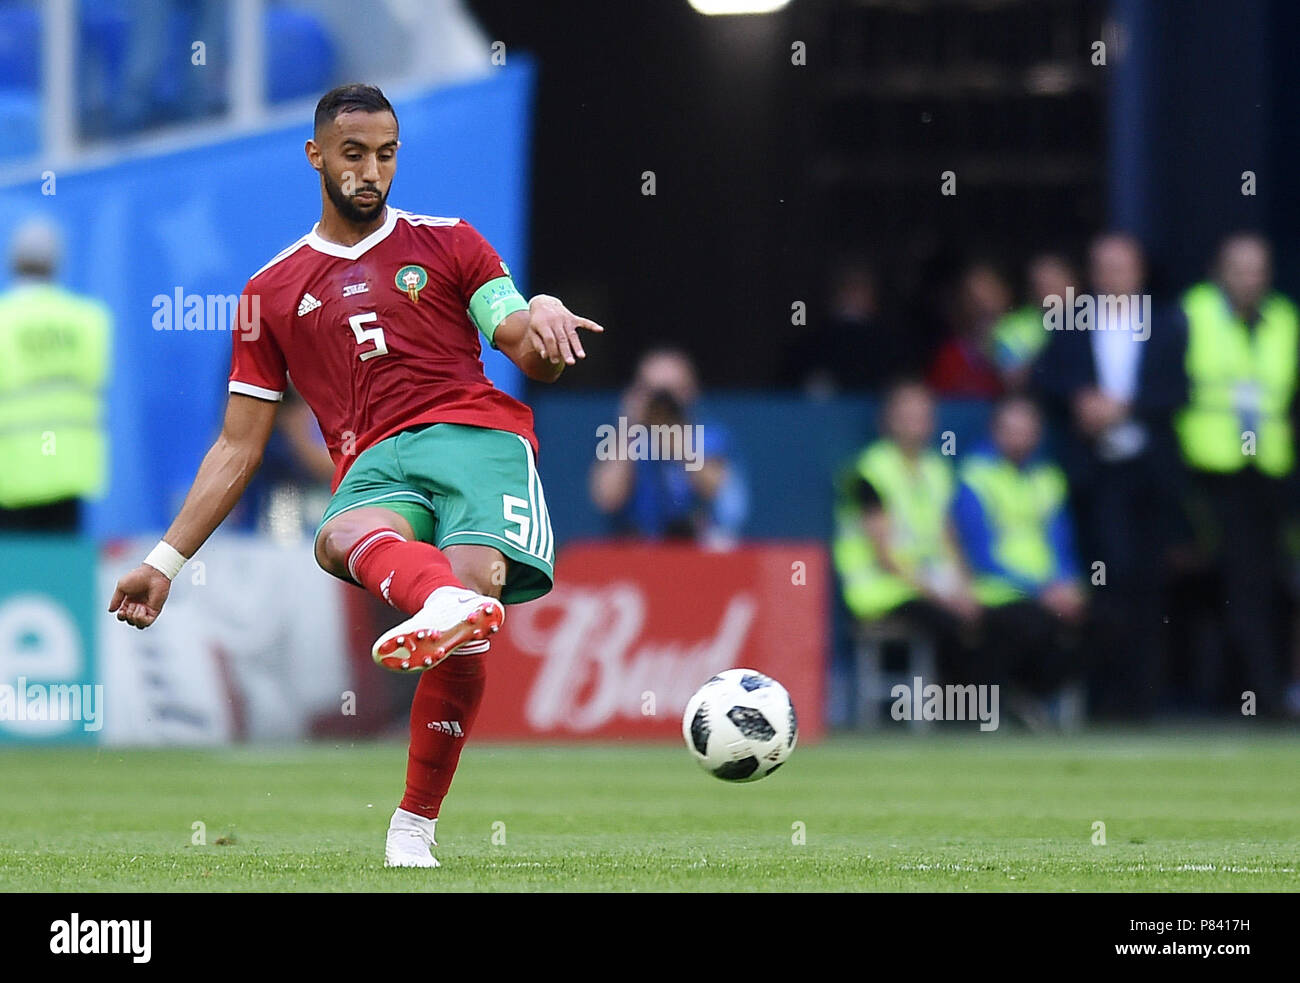 SAINT PETERSBURG, RUSSIA - JUNE 15: Milad Mohammadi of IR Iran in action during the 2018 FIFA World Cup Russia group B match between Morocco and Iran at Saint Petersburg Stadium on June 15, 2018 in Saint Petersburg, Russia. (Photo by Lukasz Laskowski/PressFocus/MB Media) Stock Photo